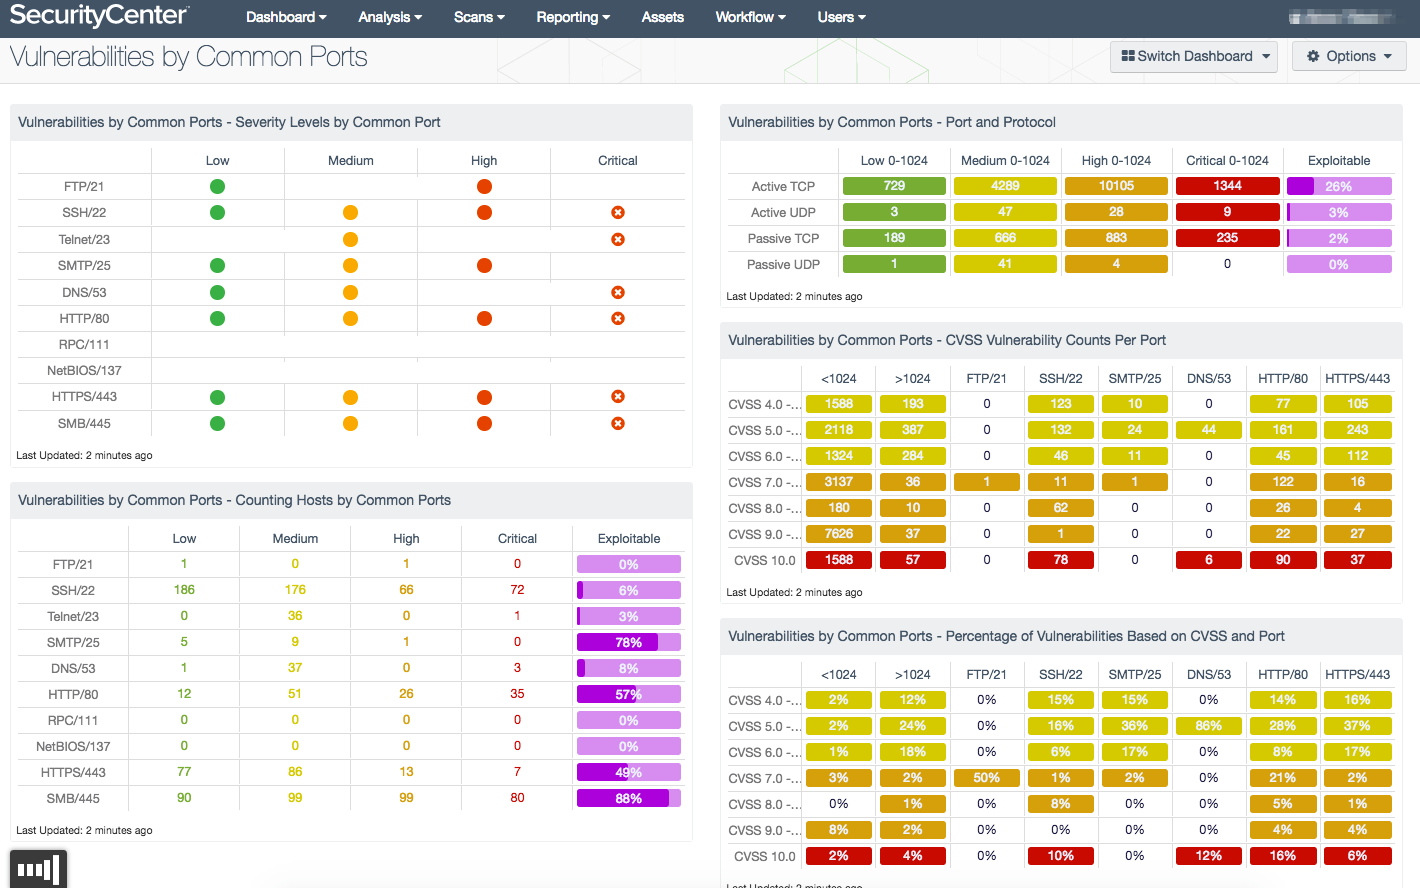 Vulnerabilities by Common Ports dashboard